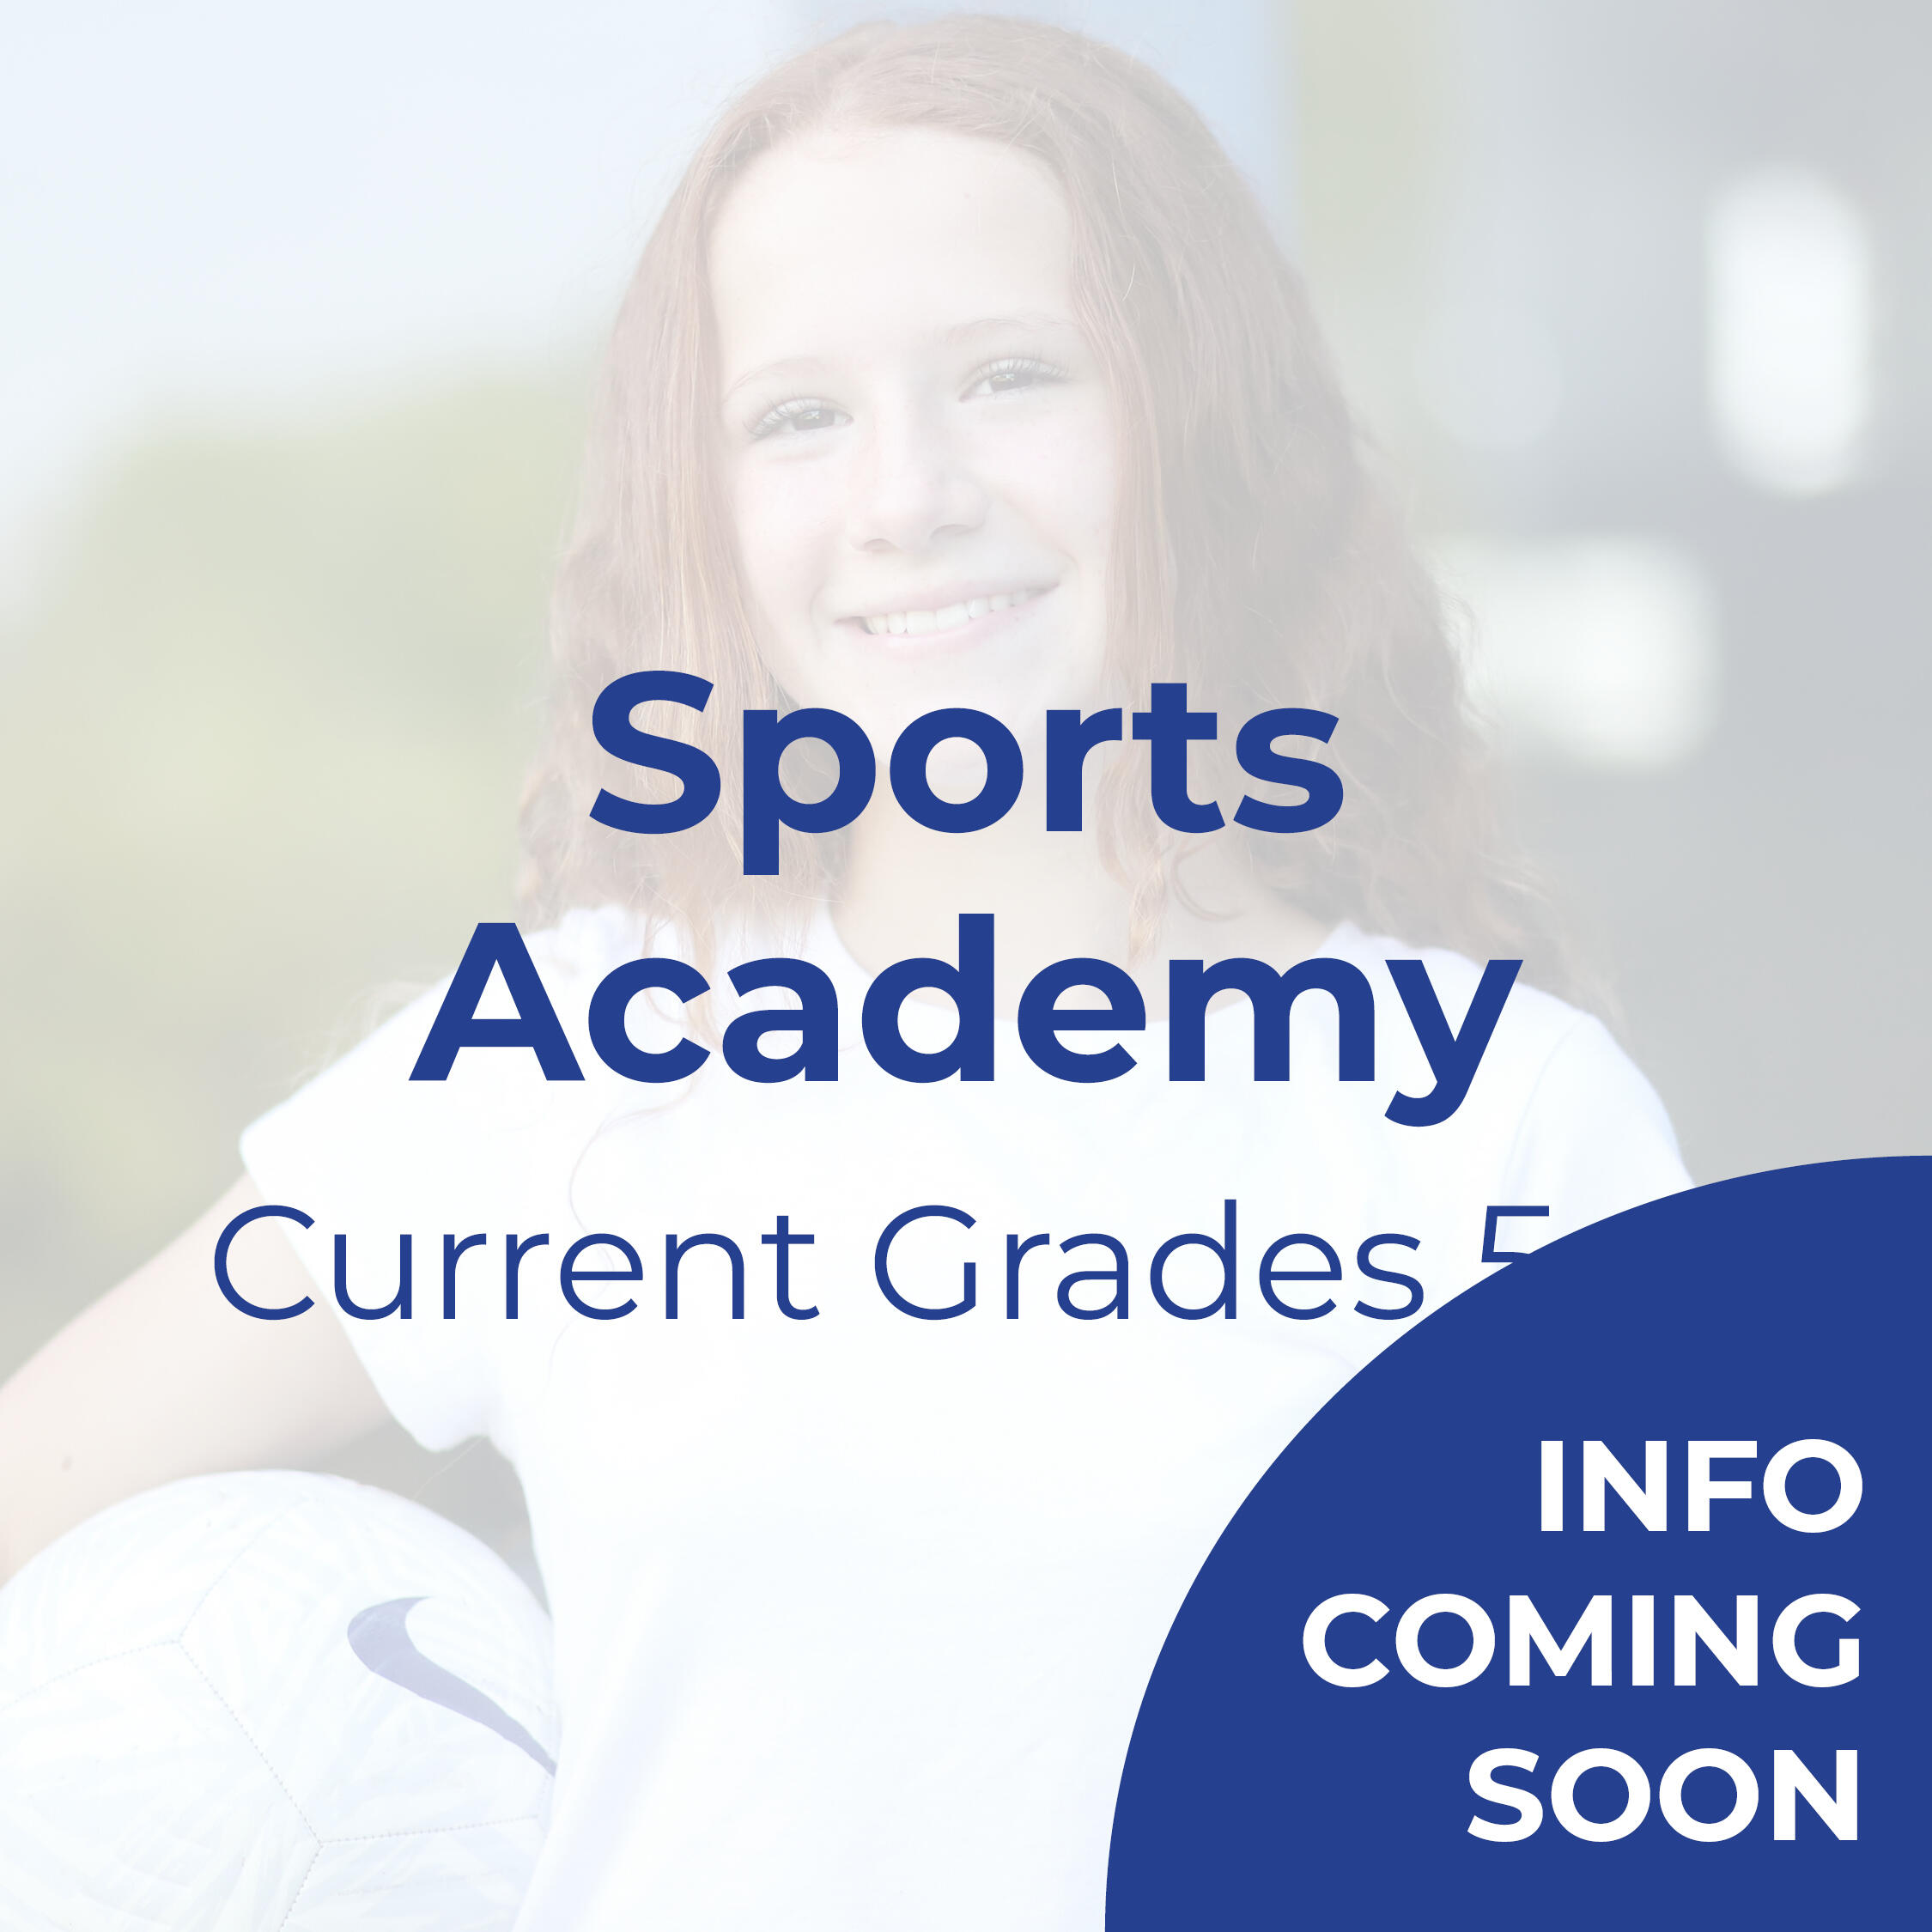 Text that reads "Sports Academy: Current grades 5-8" 